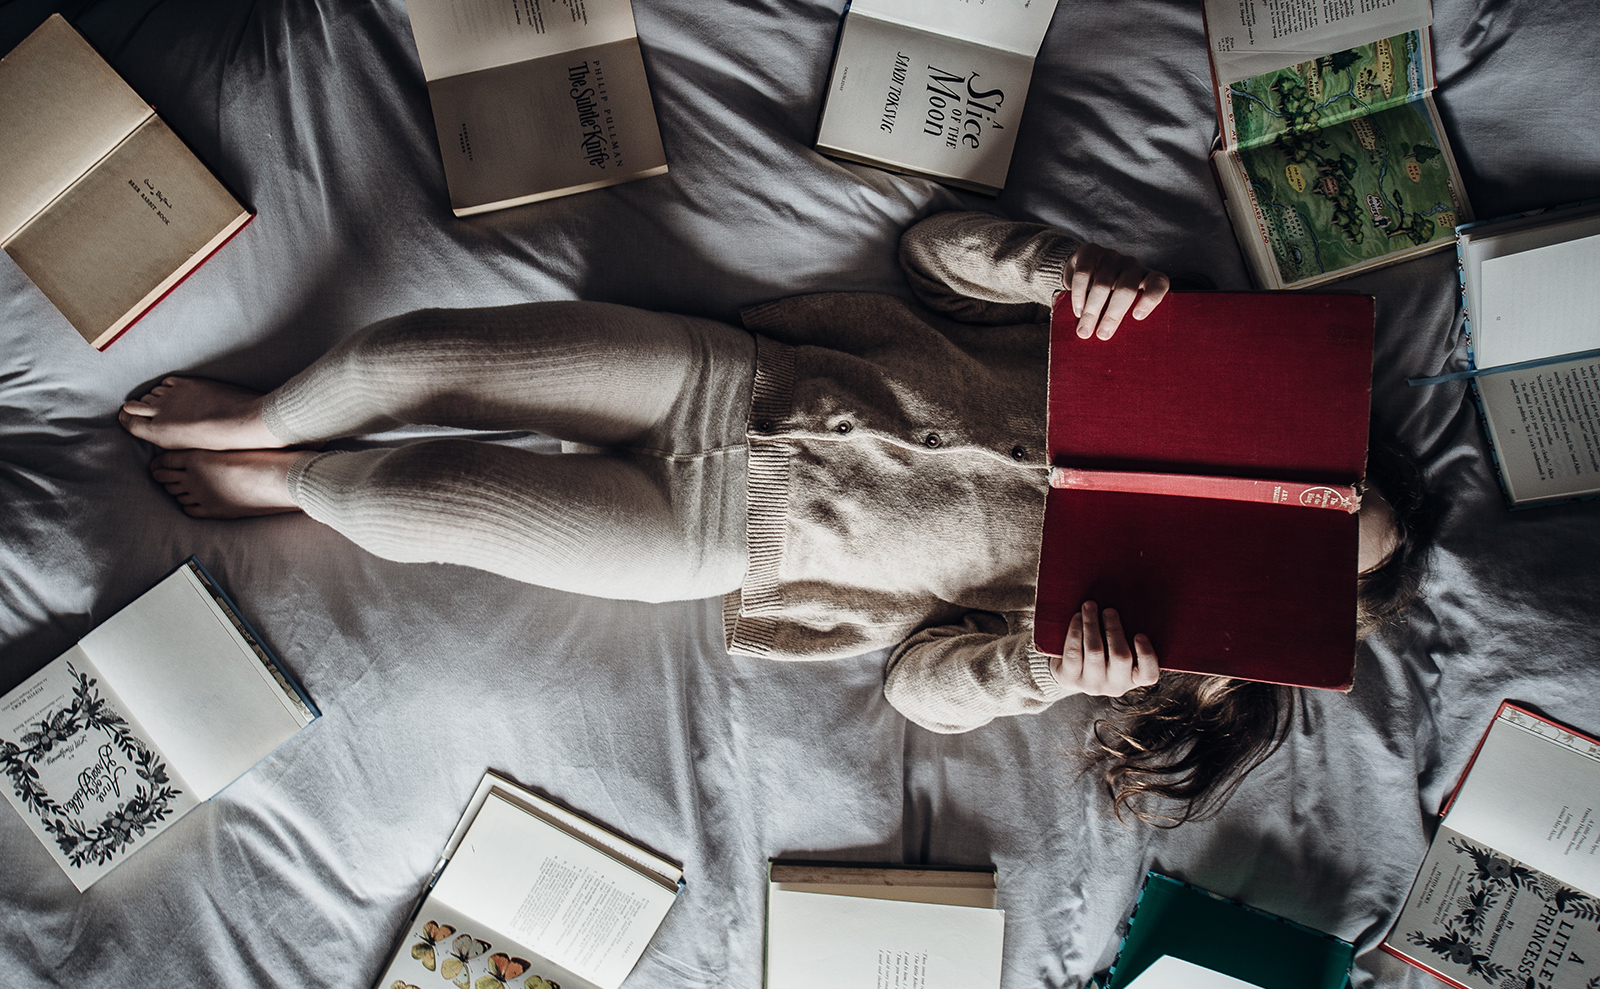 a young girl lying on a bed surrounded by books